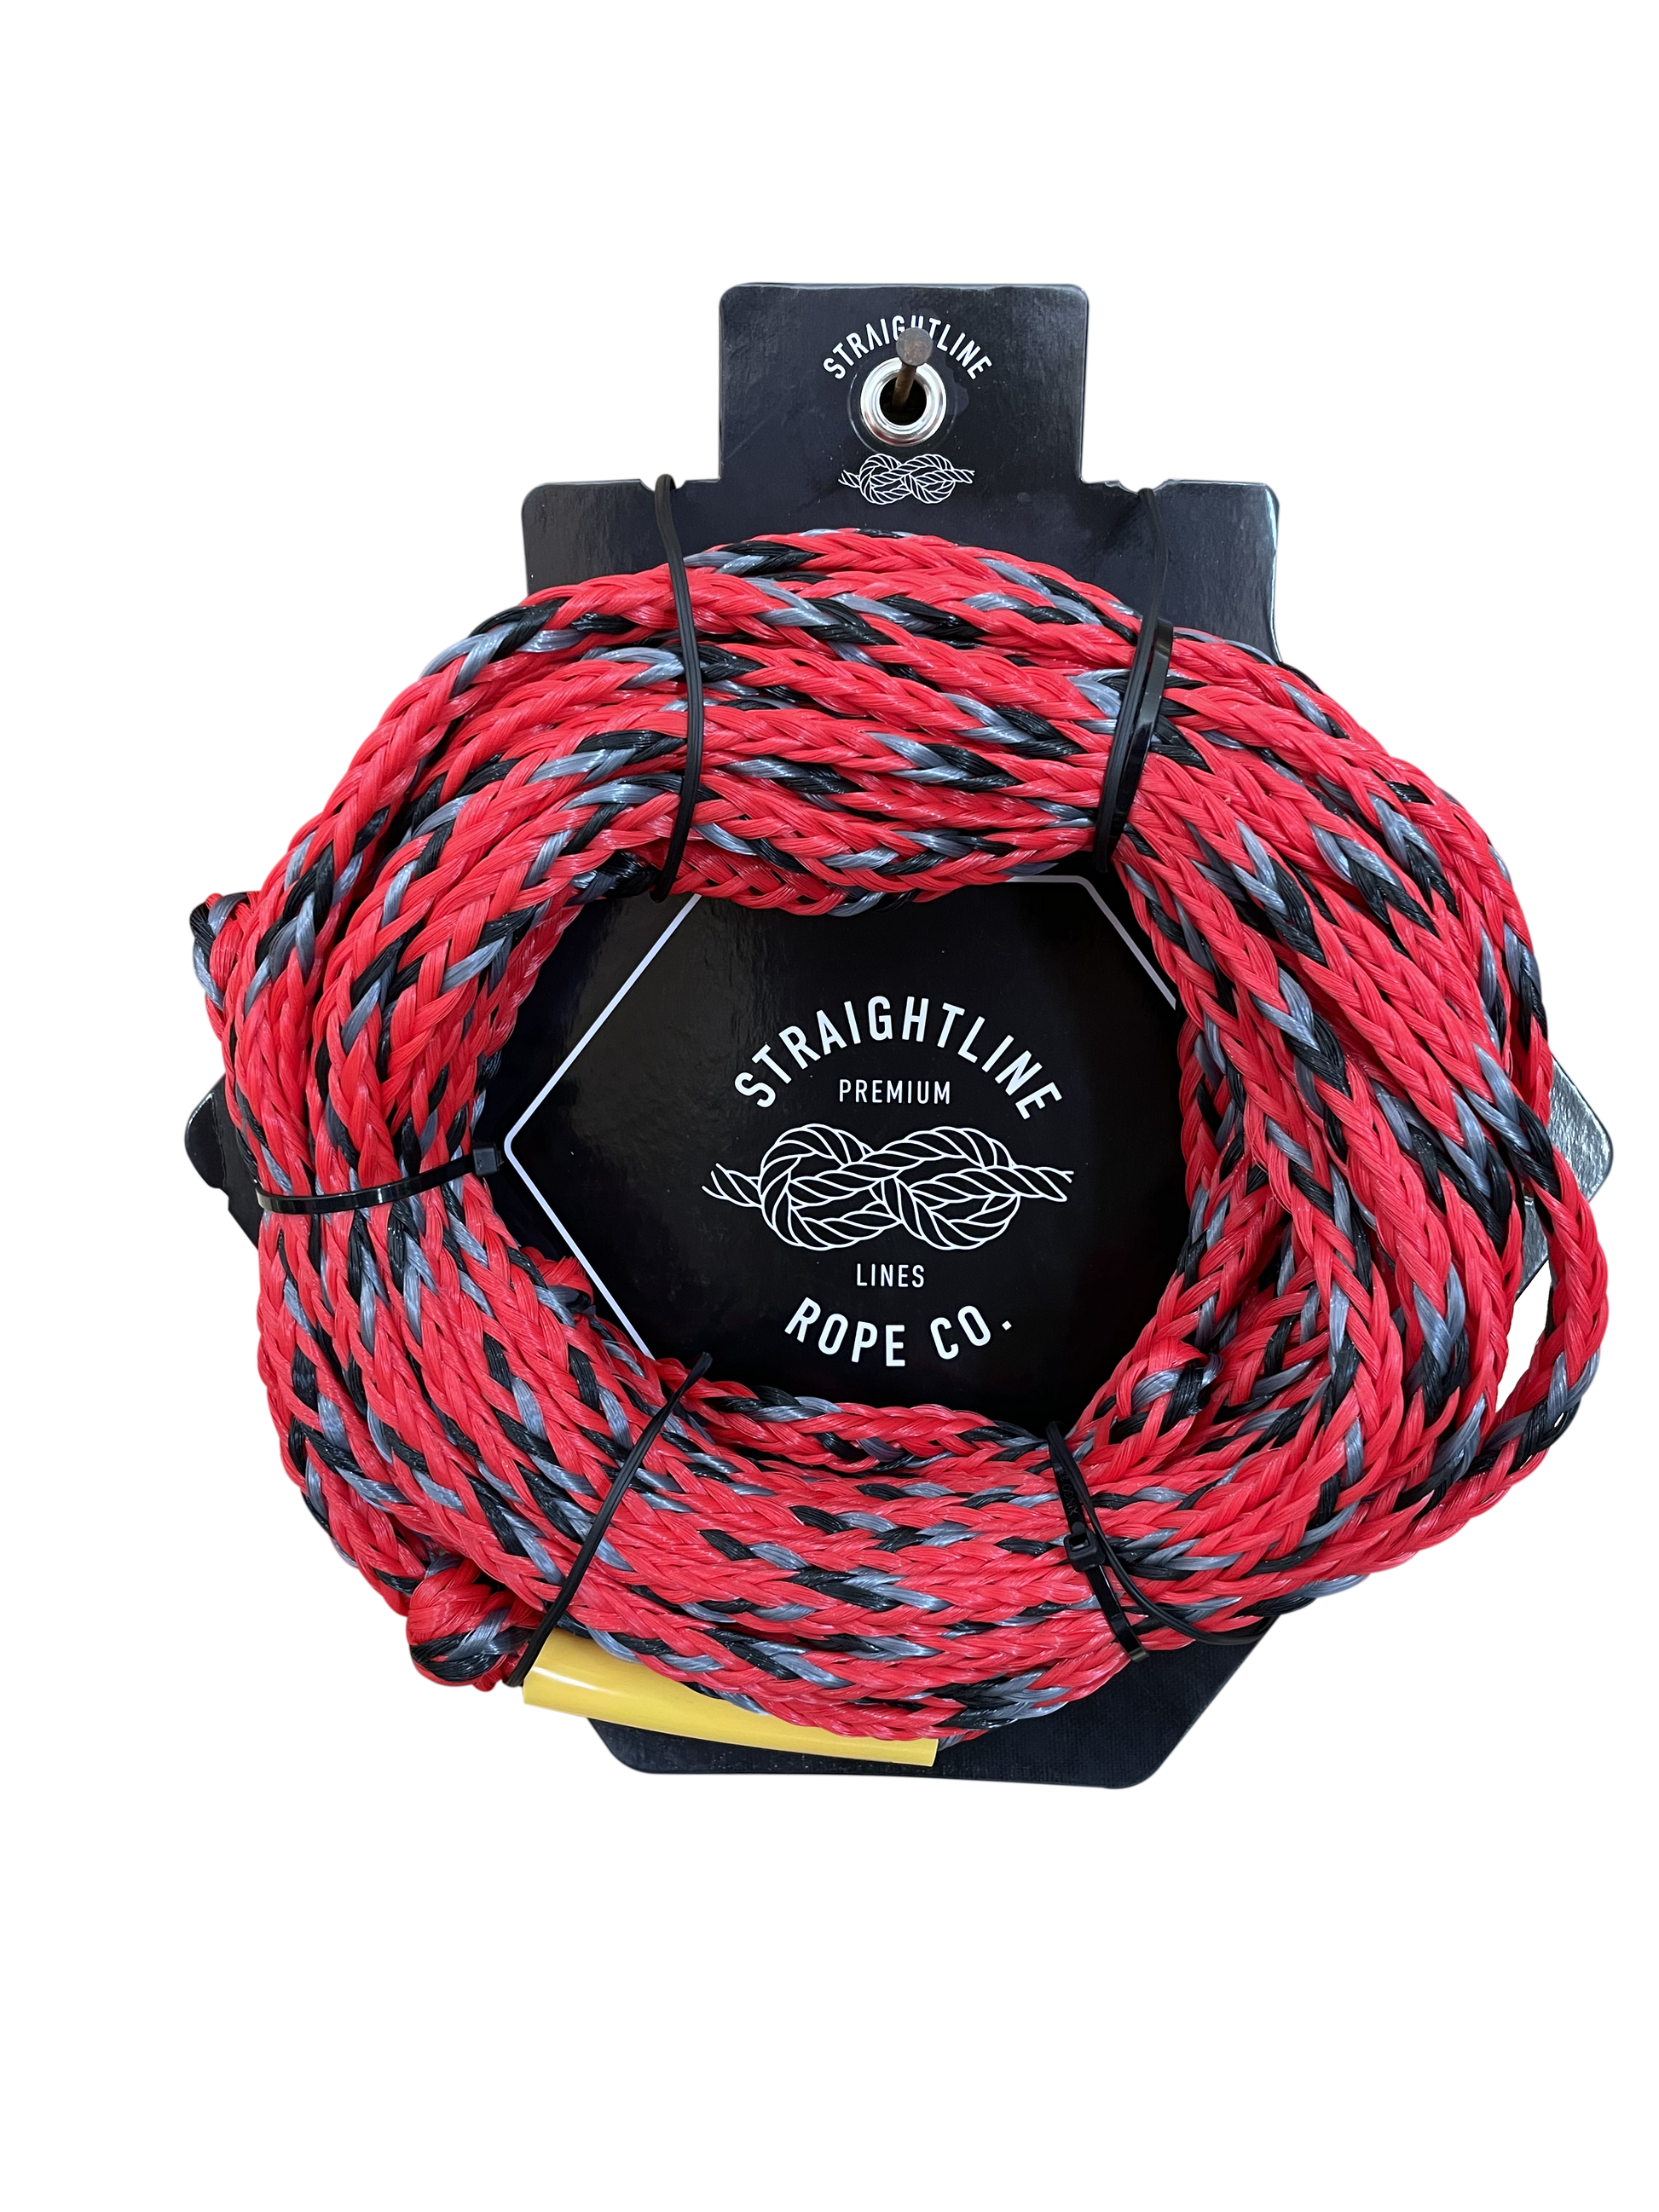 2 PERSON TUBE ROPE – Straightline Sports